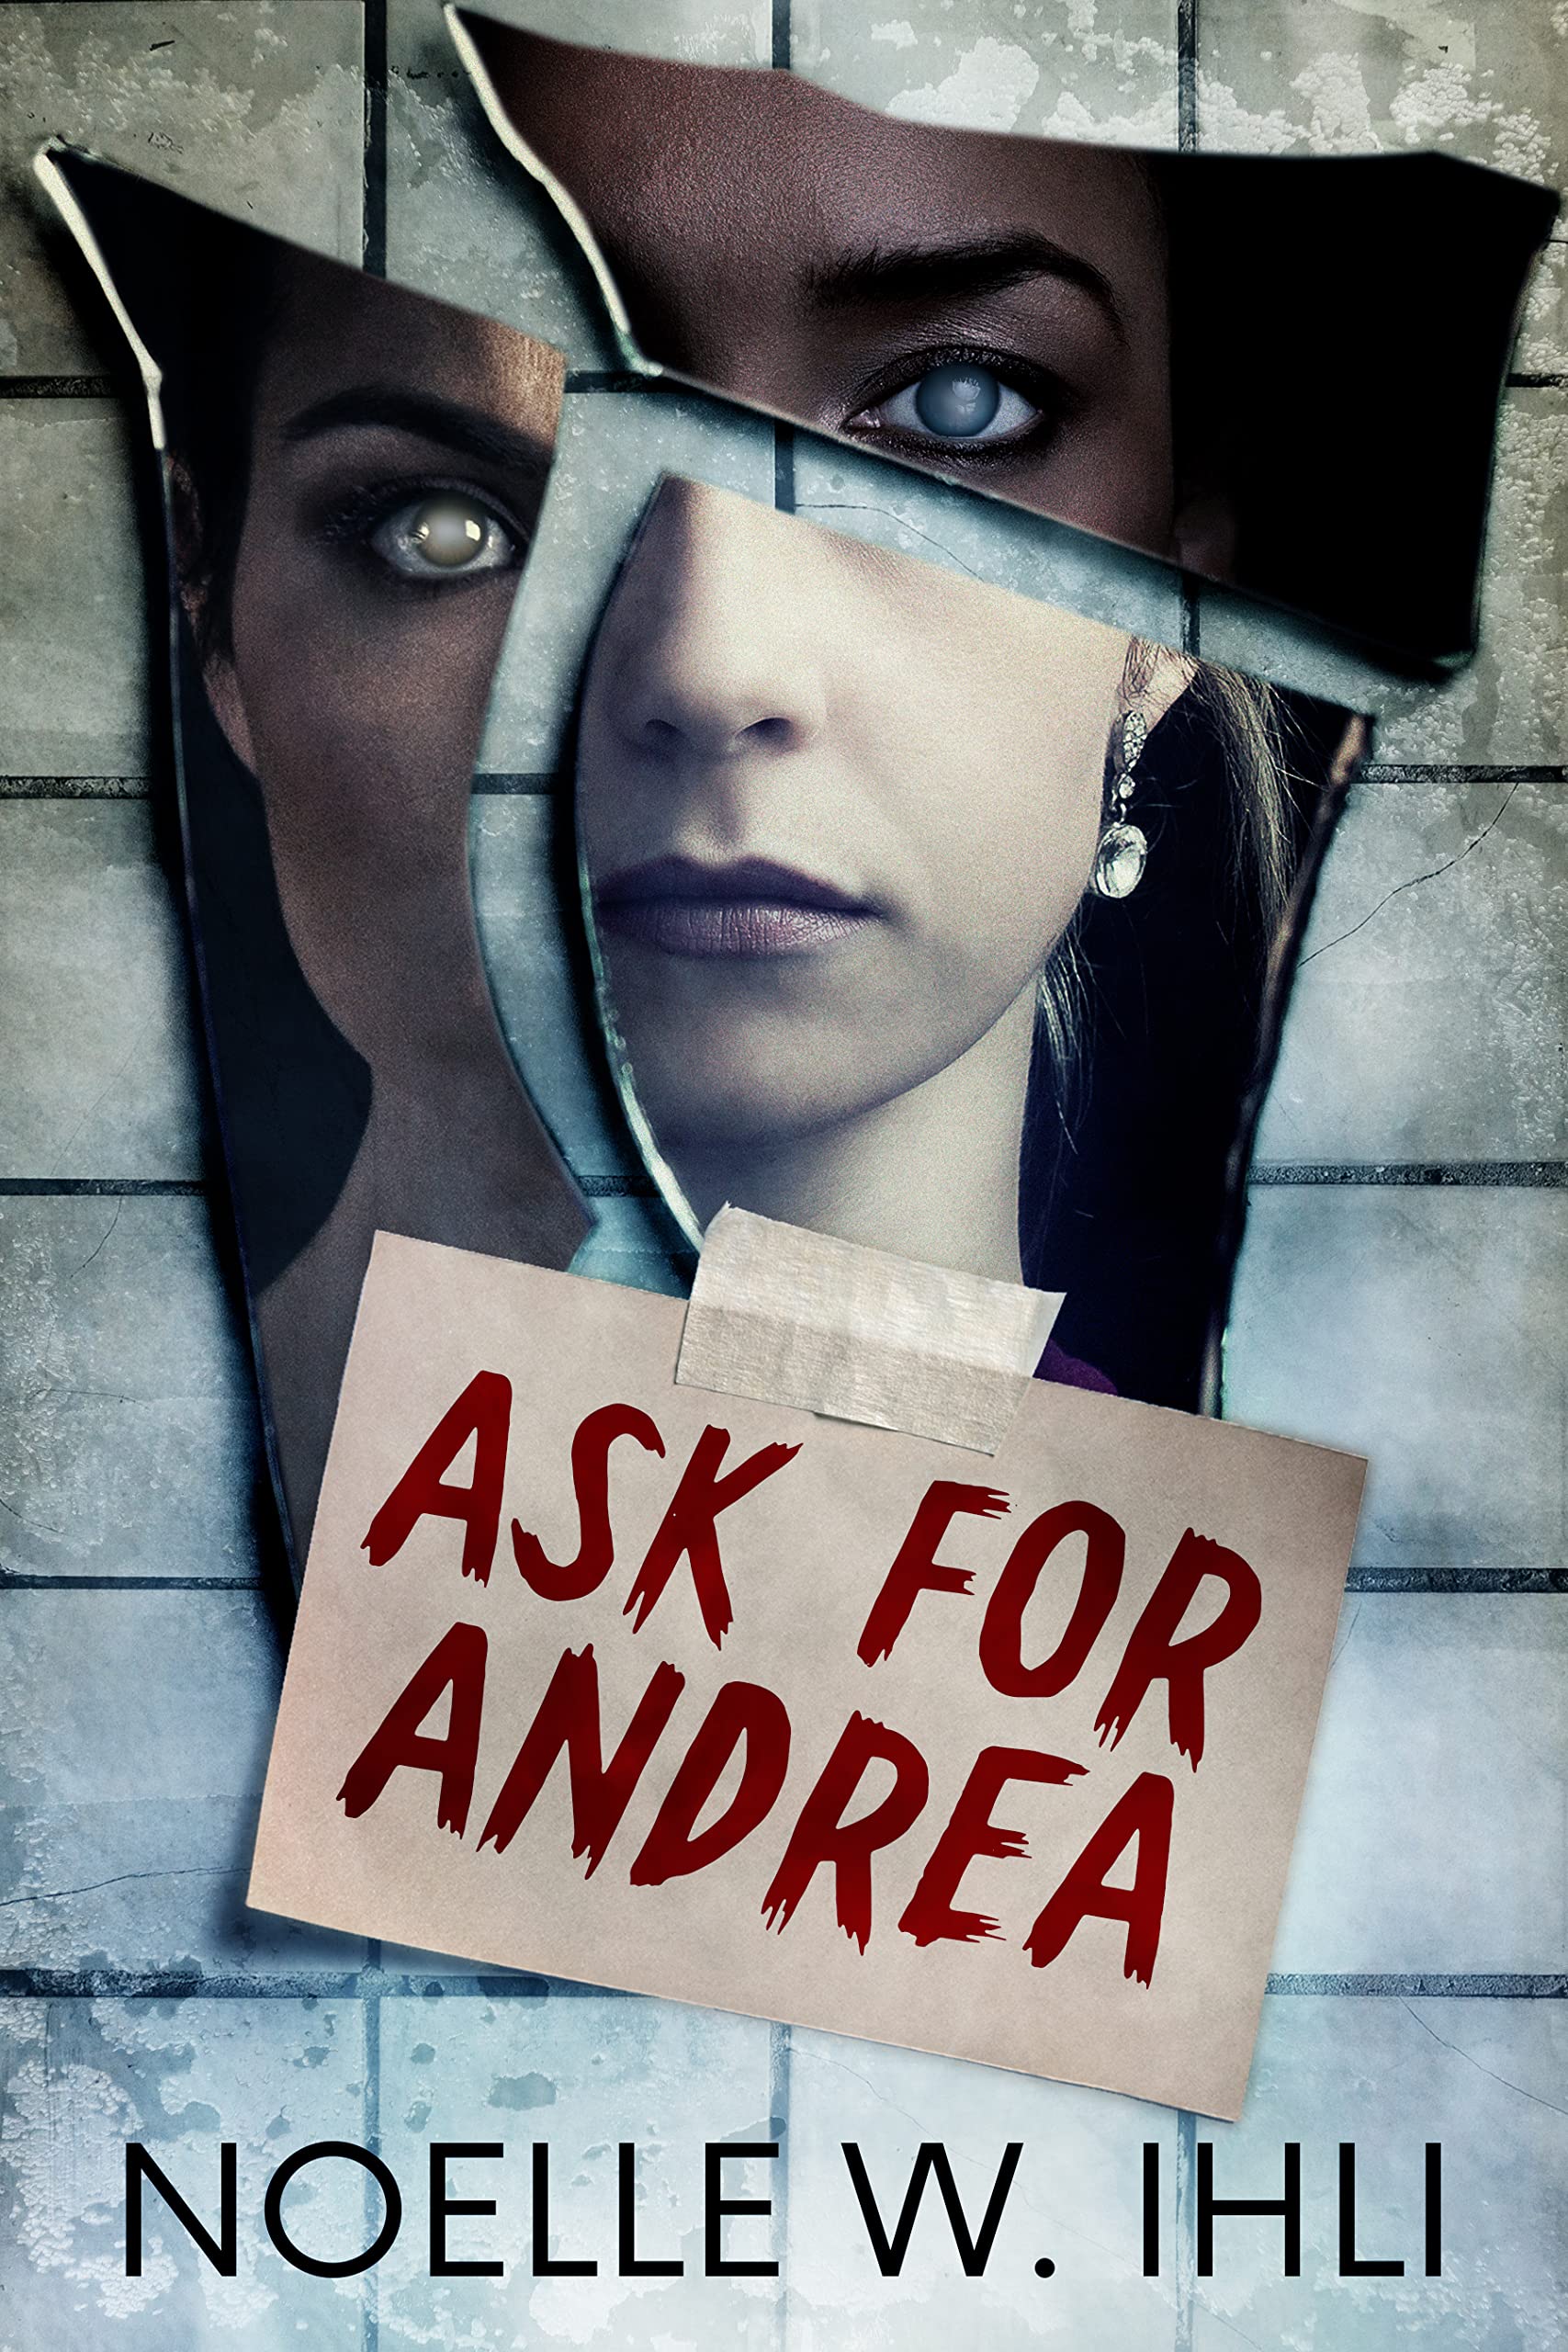 Ask for Andrea: A tense and gripping thriller with an unforgettable ending